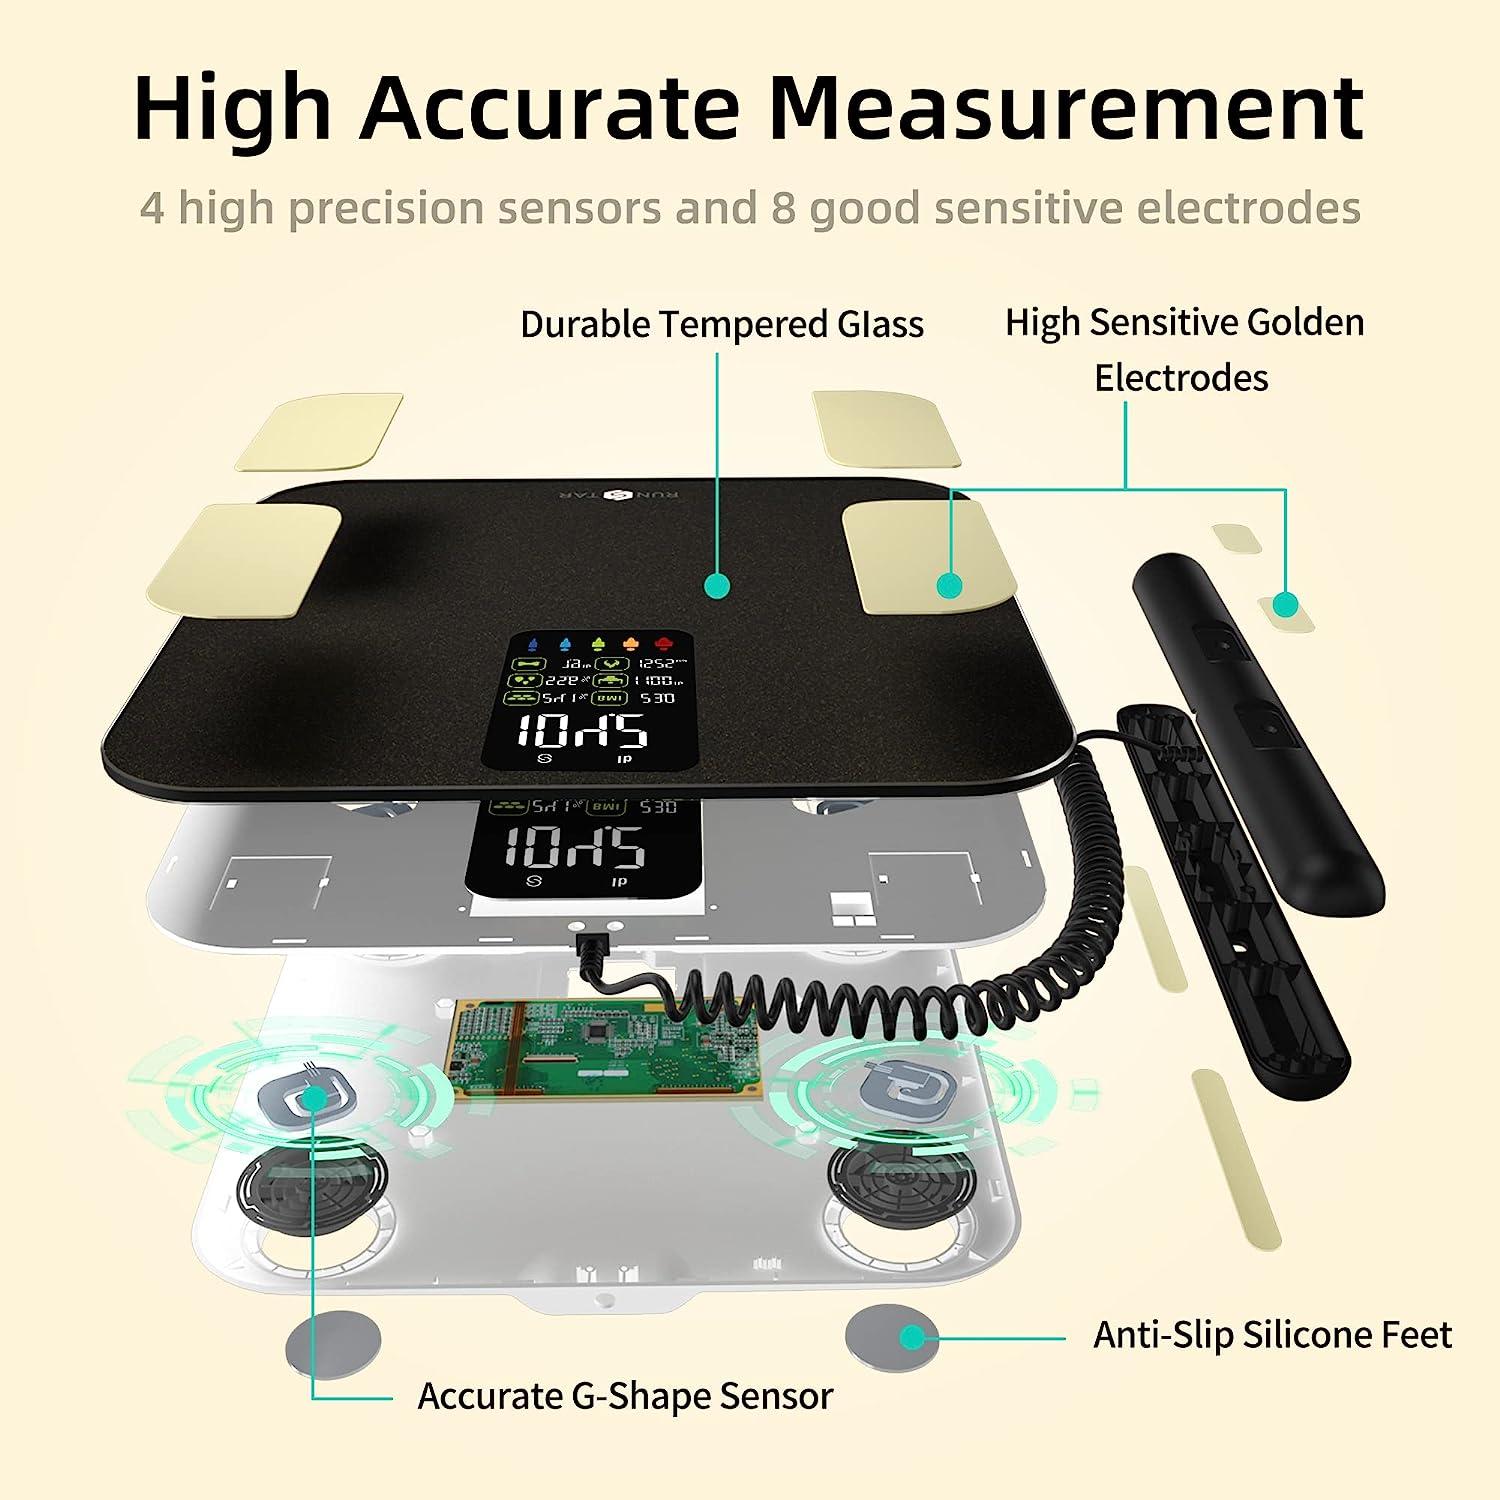 Large Display Body Scale for Fat Heart Rate Heart Index Muscle